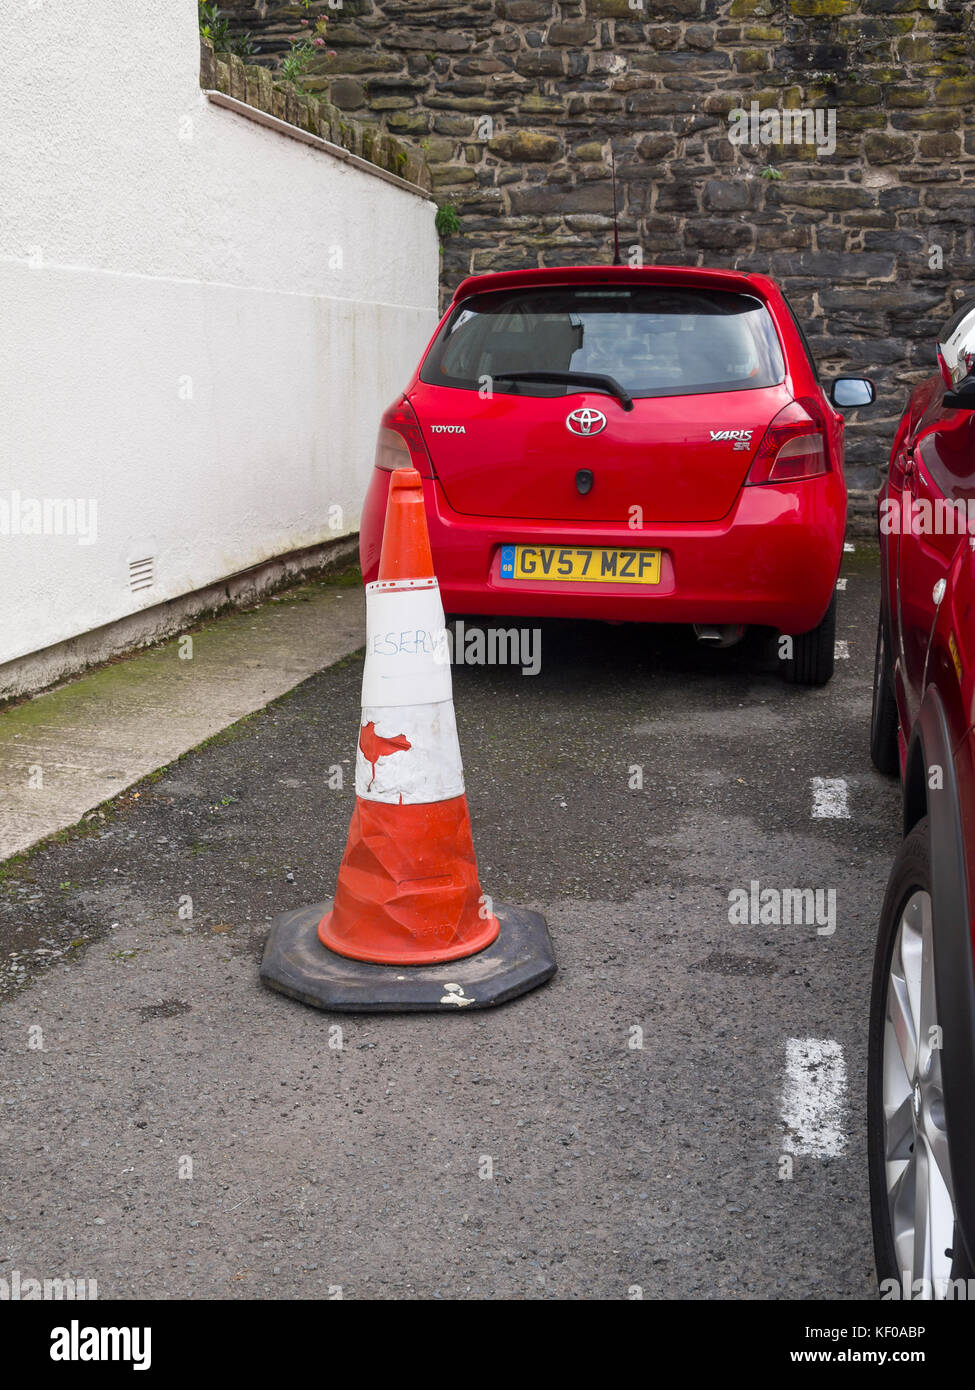 homemade reserved parking sign on traffic cone Stock Photo